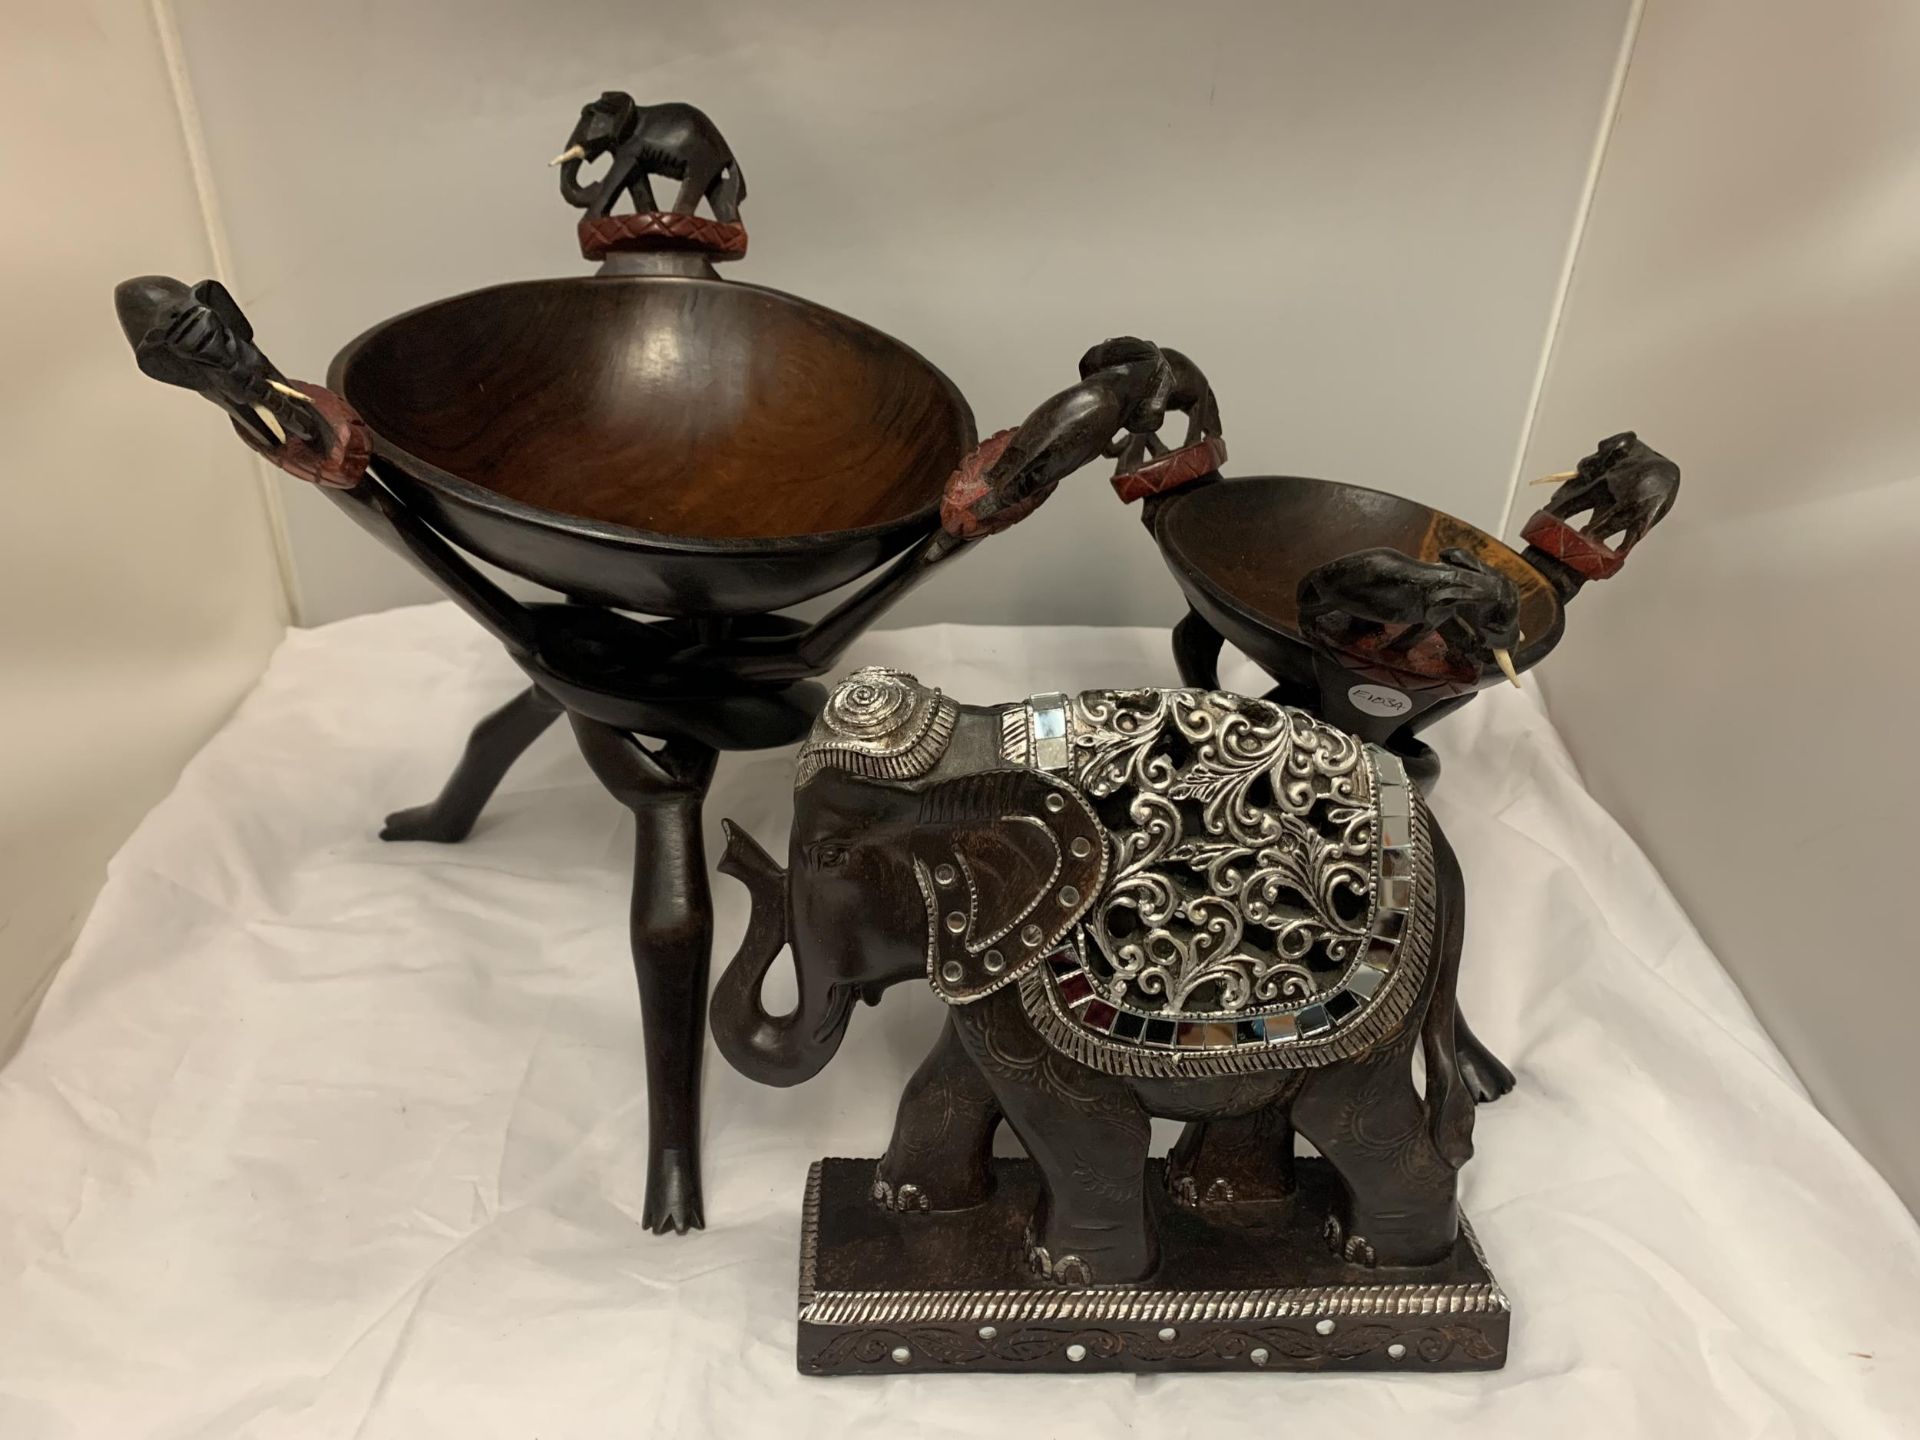 THREE ELEPHANT THEMED ITEMS TO INCLUDE TWO BOWLS ON TRIPOD LEGS AND A HIGHLY DECORATIVE WOODEN